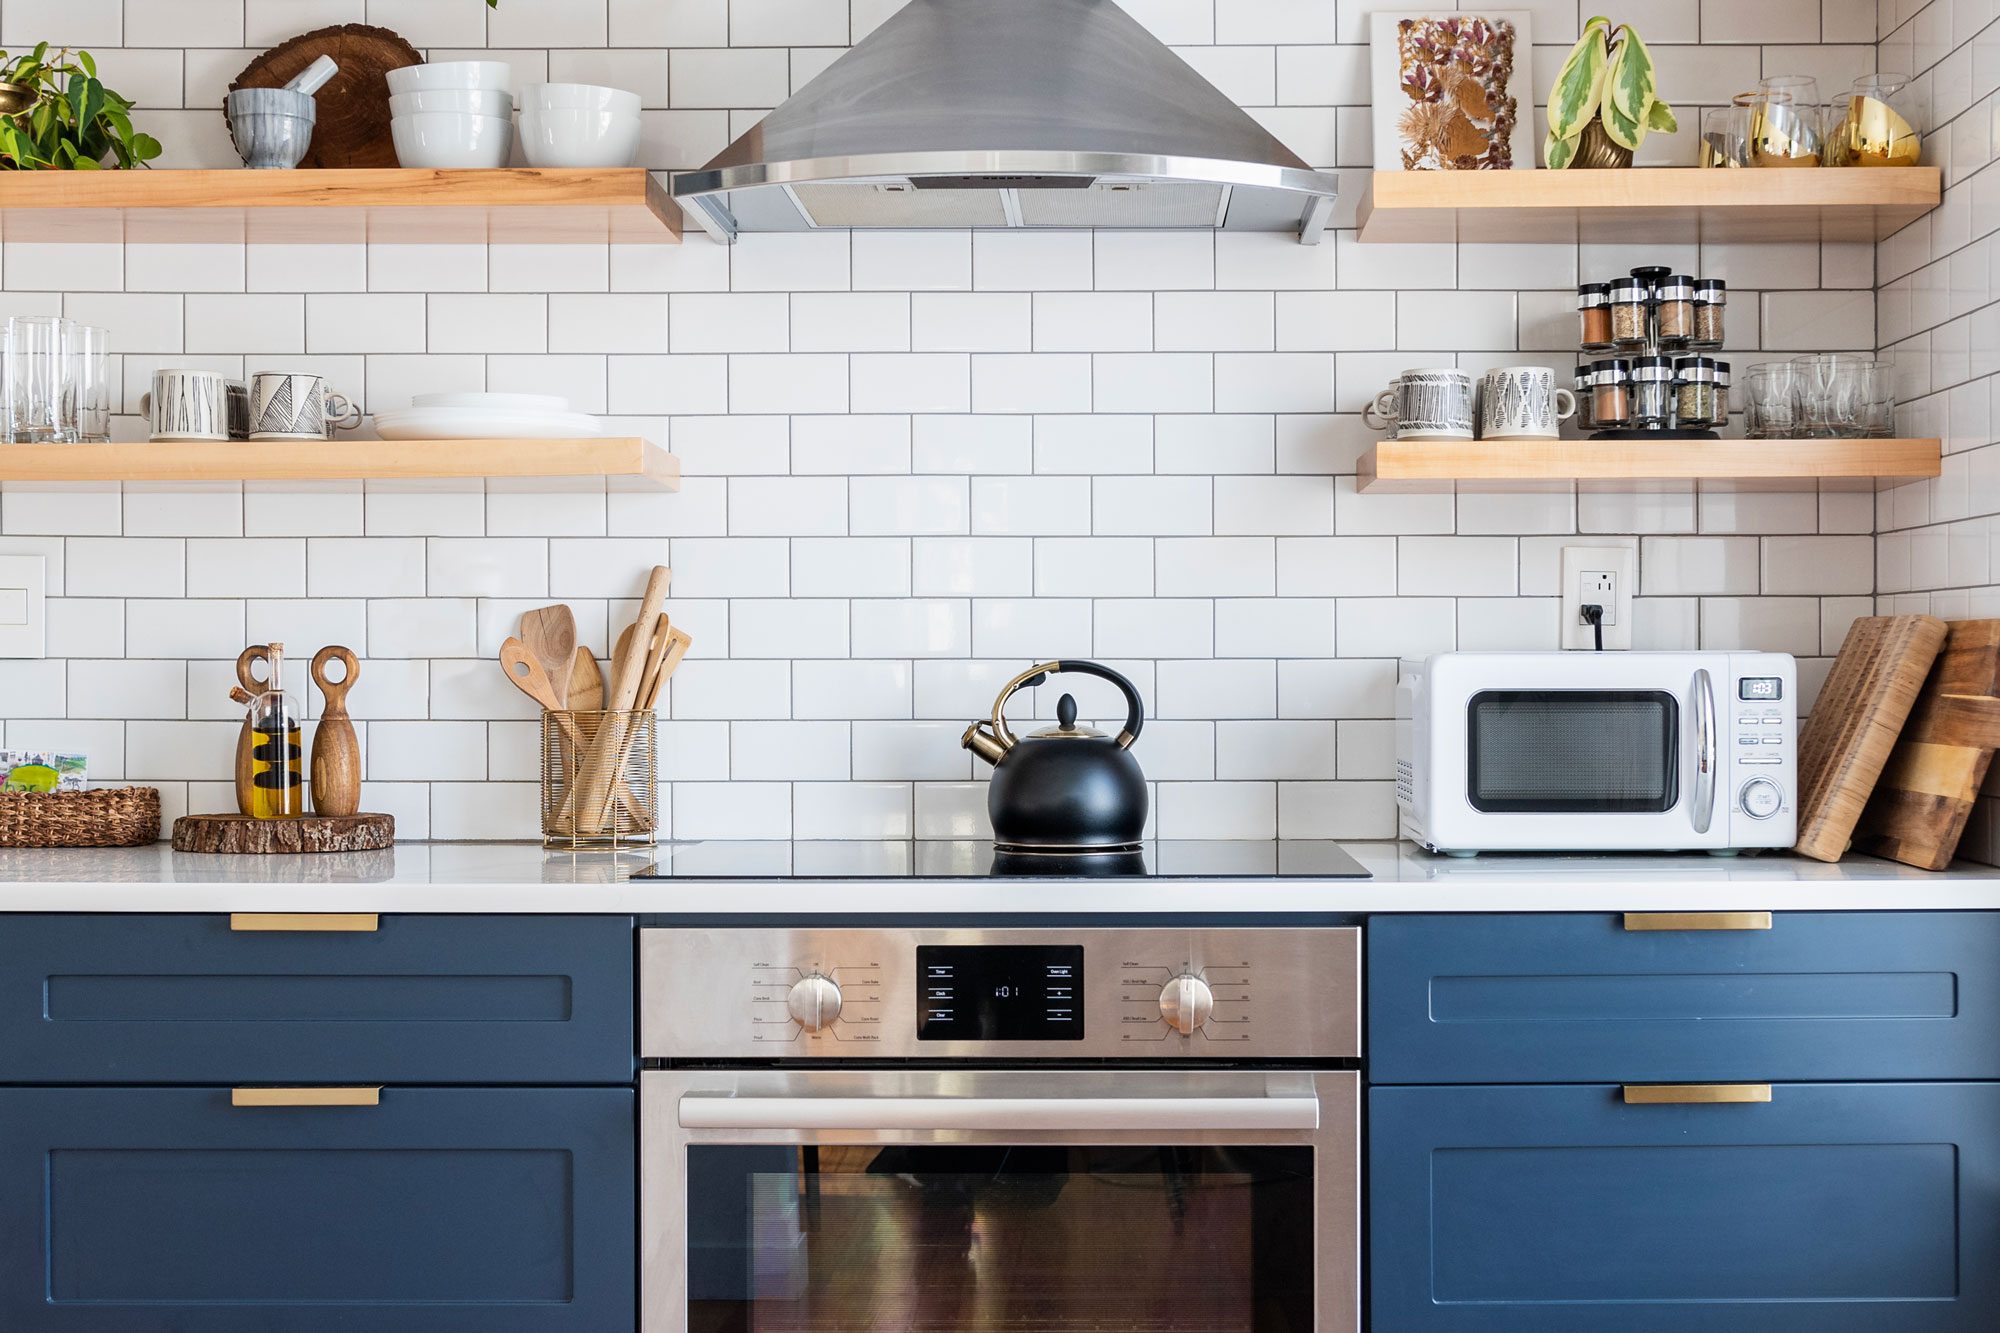 Keeping your kitchen counters organized doesn't mean tucking